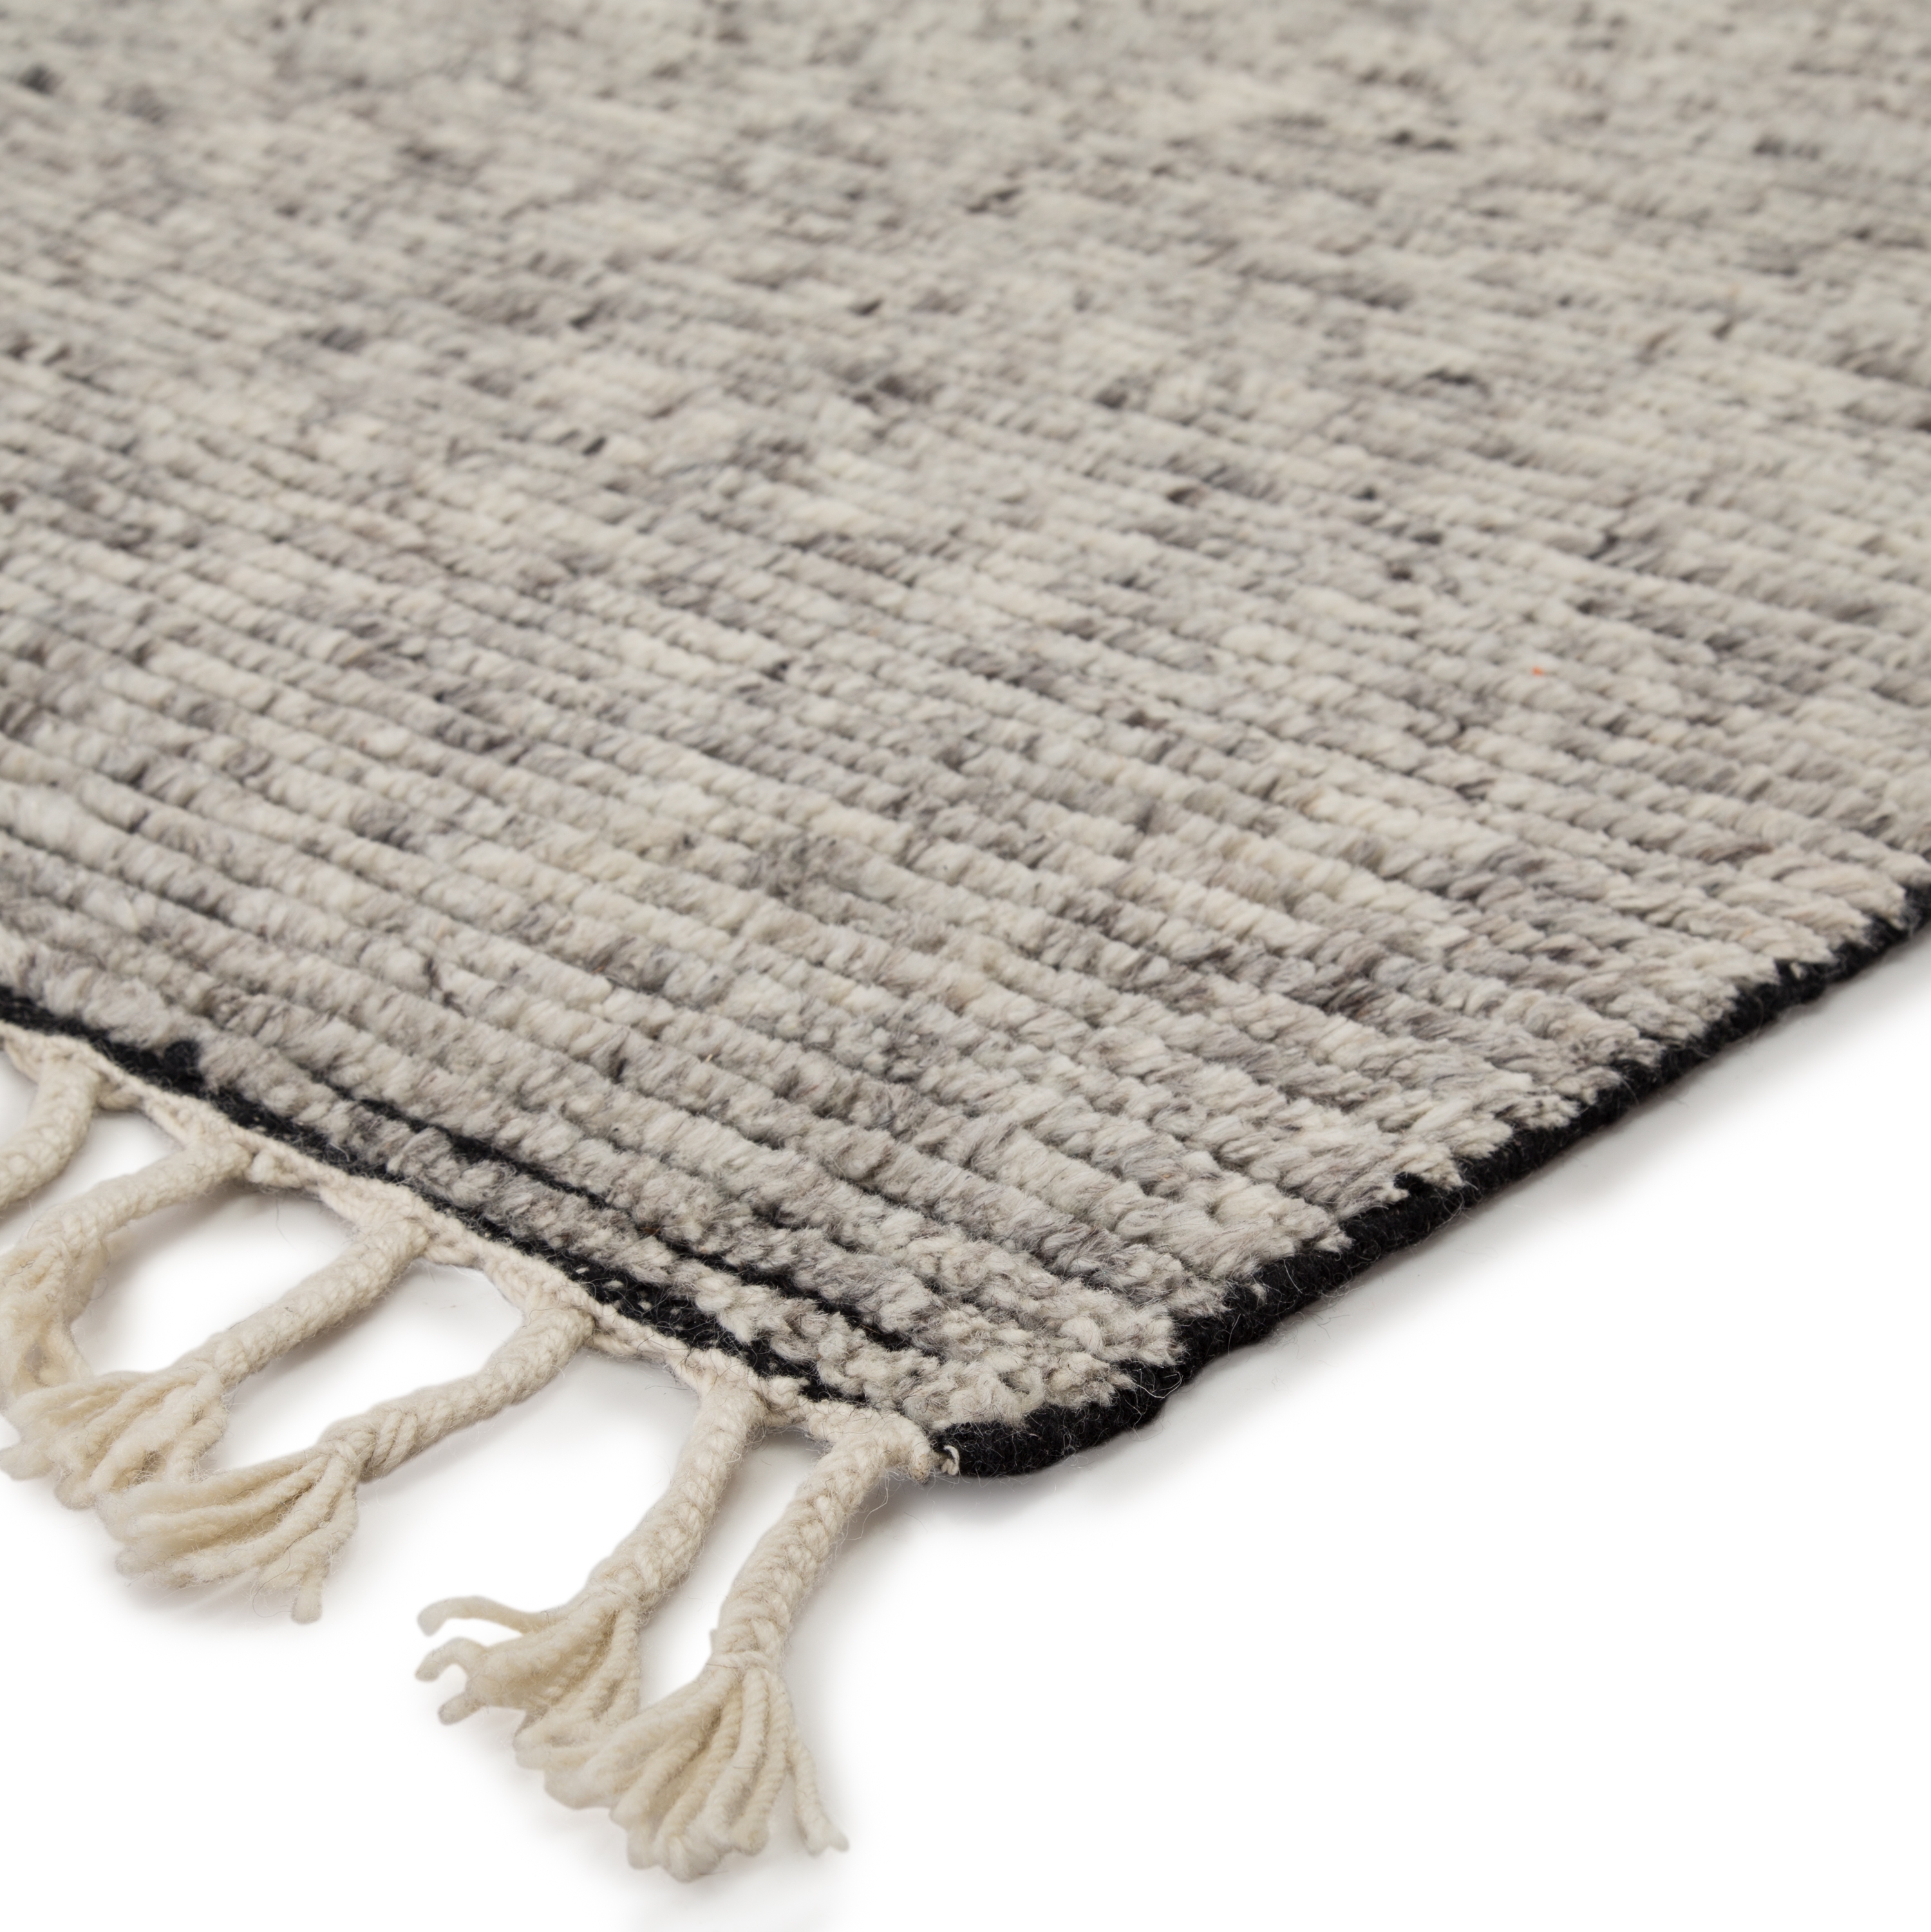 Alpine Hand-Knotted Stripe White/ Gray Area Rug (8' X 11') - Image 1